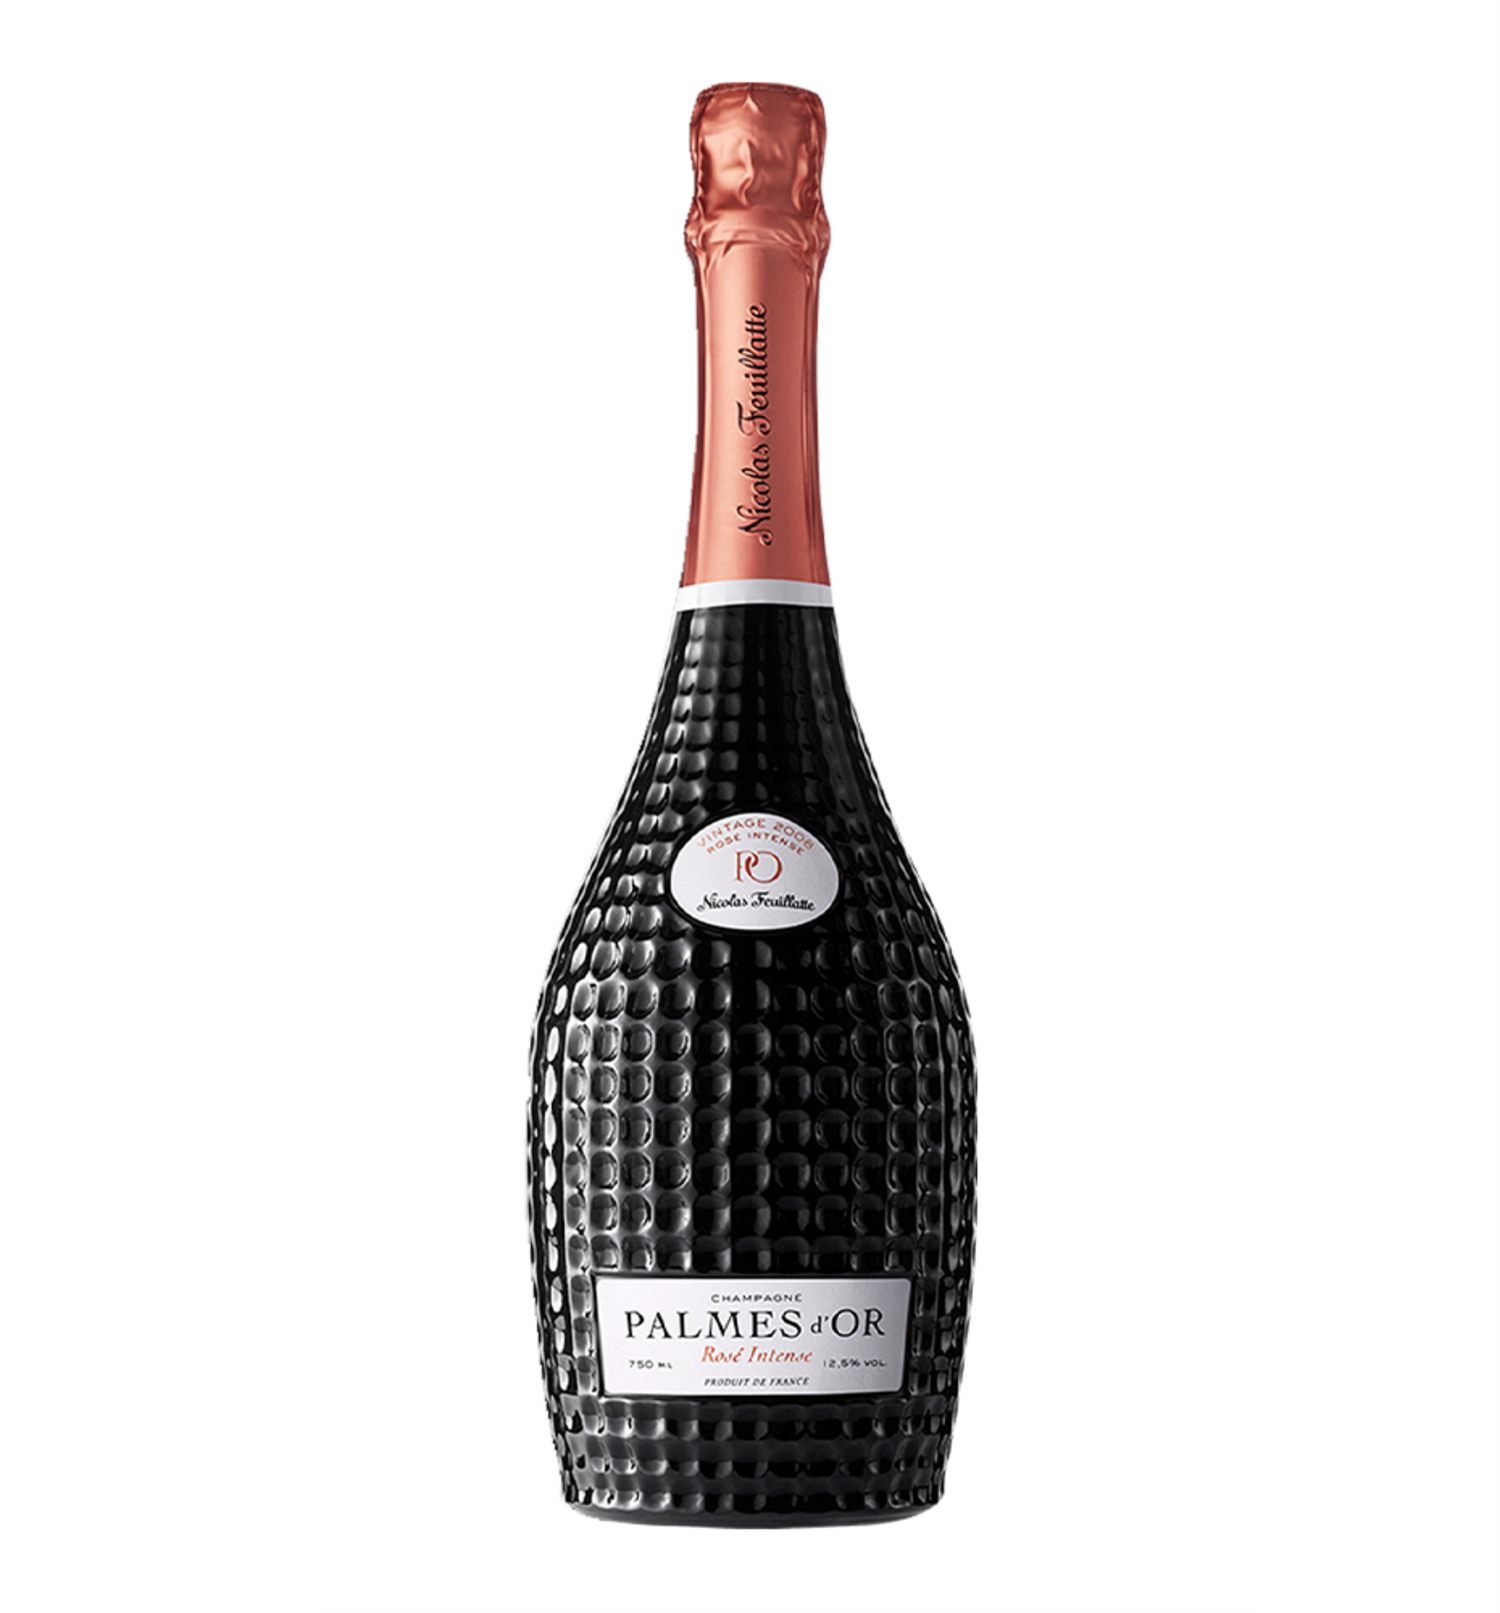 Nicolas Feuillatte Palmes D`or Rose Vintage Fossil 750ml Uncle Intense 2008 Champagne - Wine&Spirits